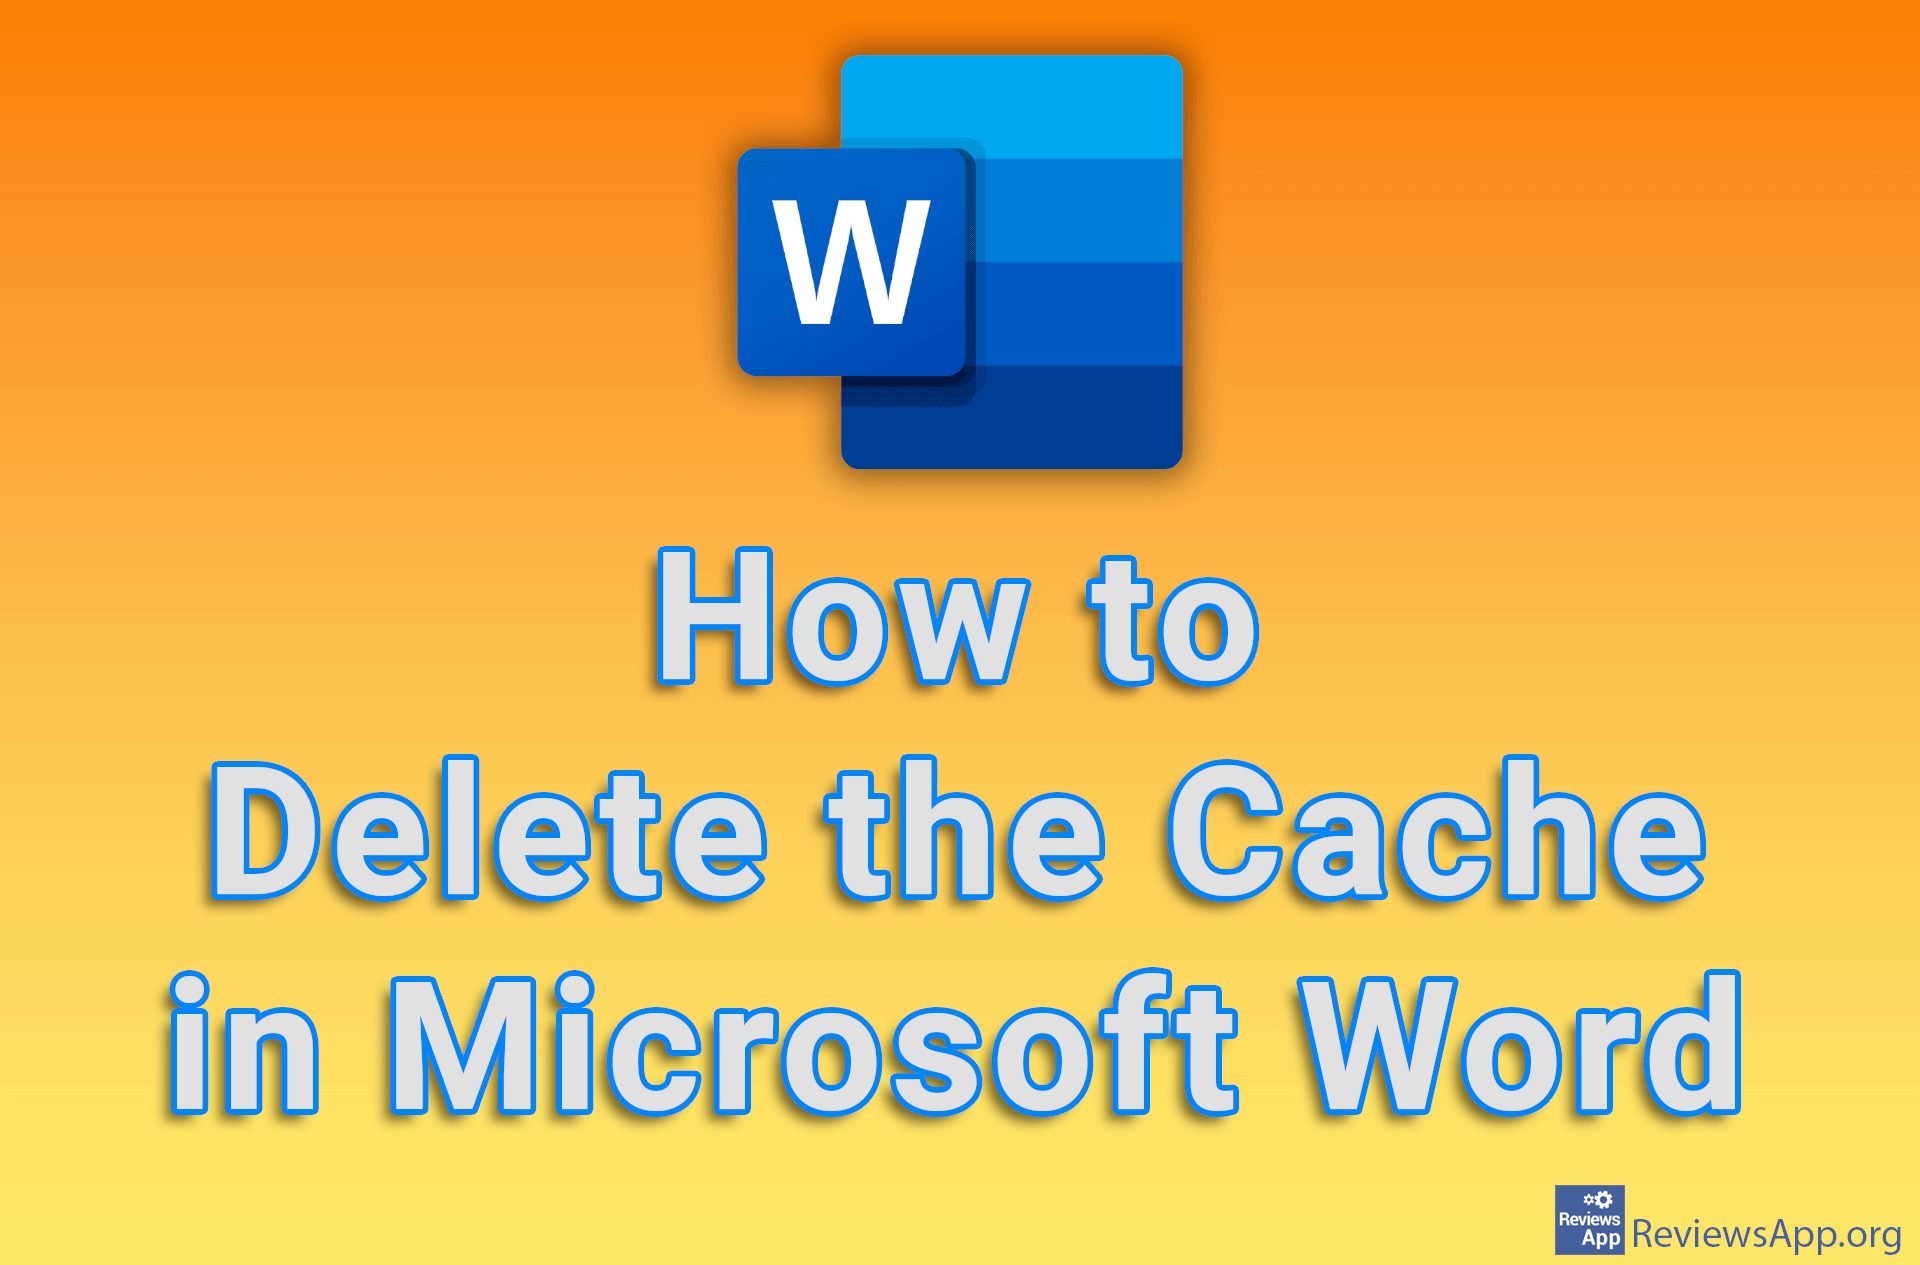 How to Delete the Cache in Microsoft Word